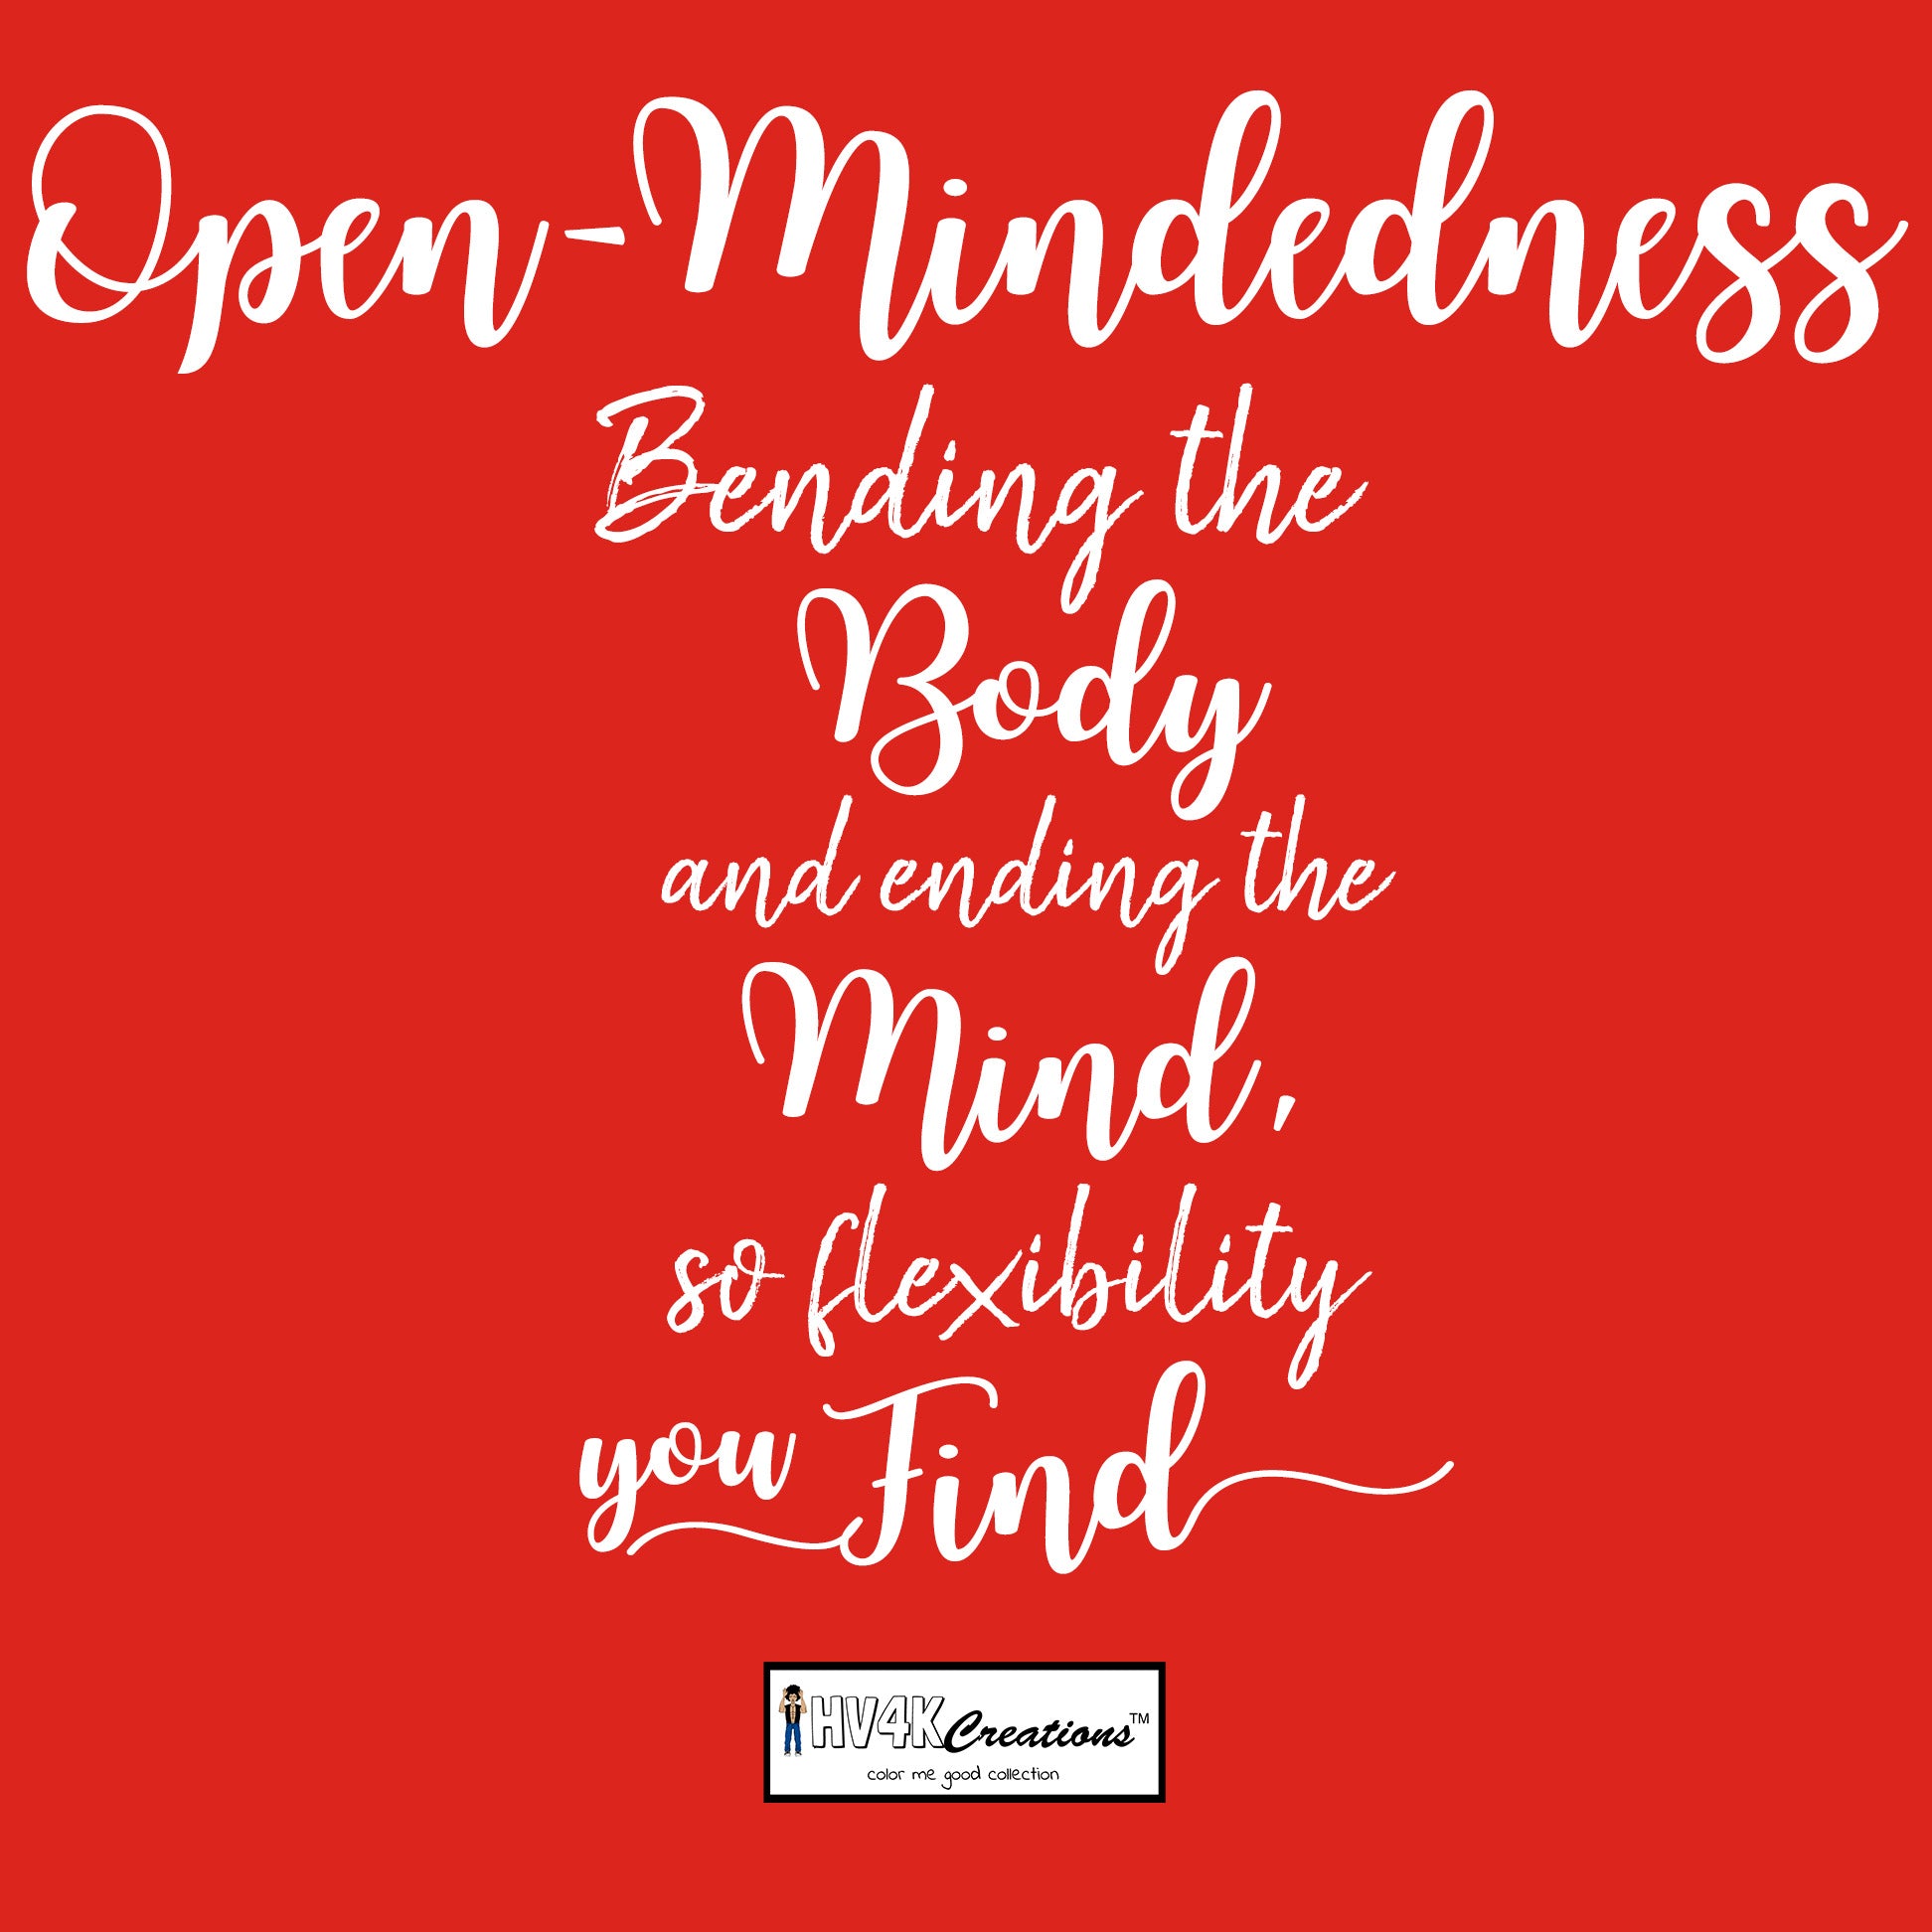 open-mindedness rhyme picture